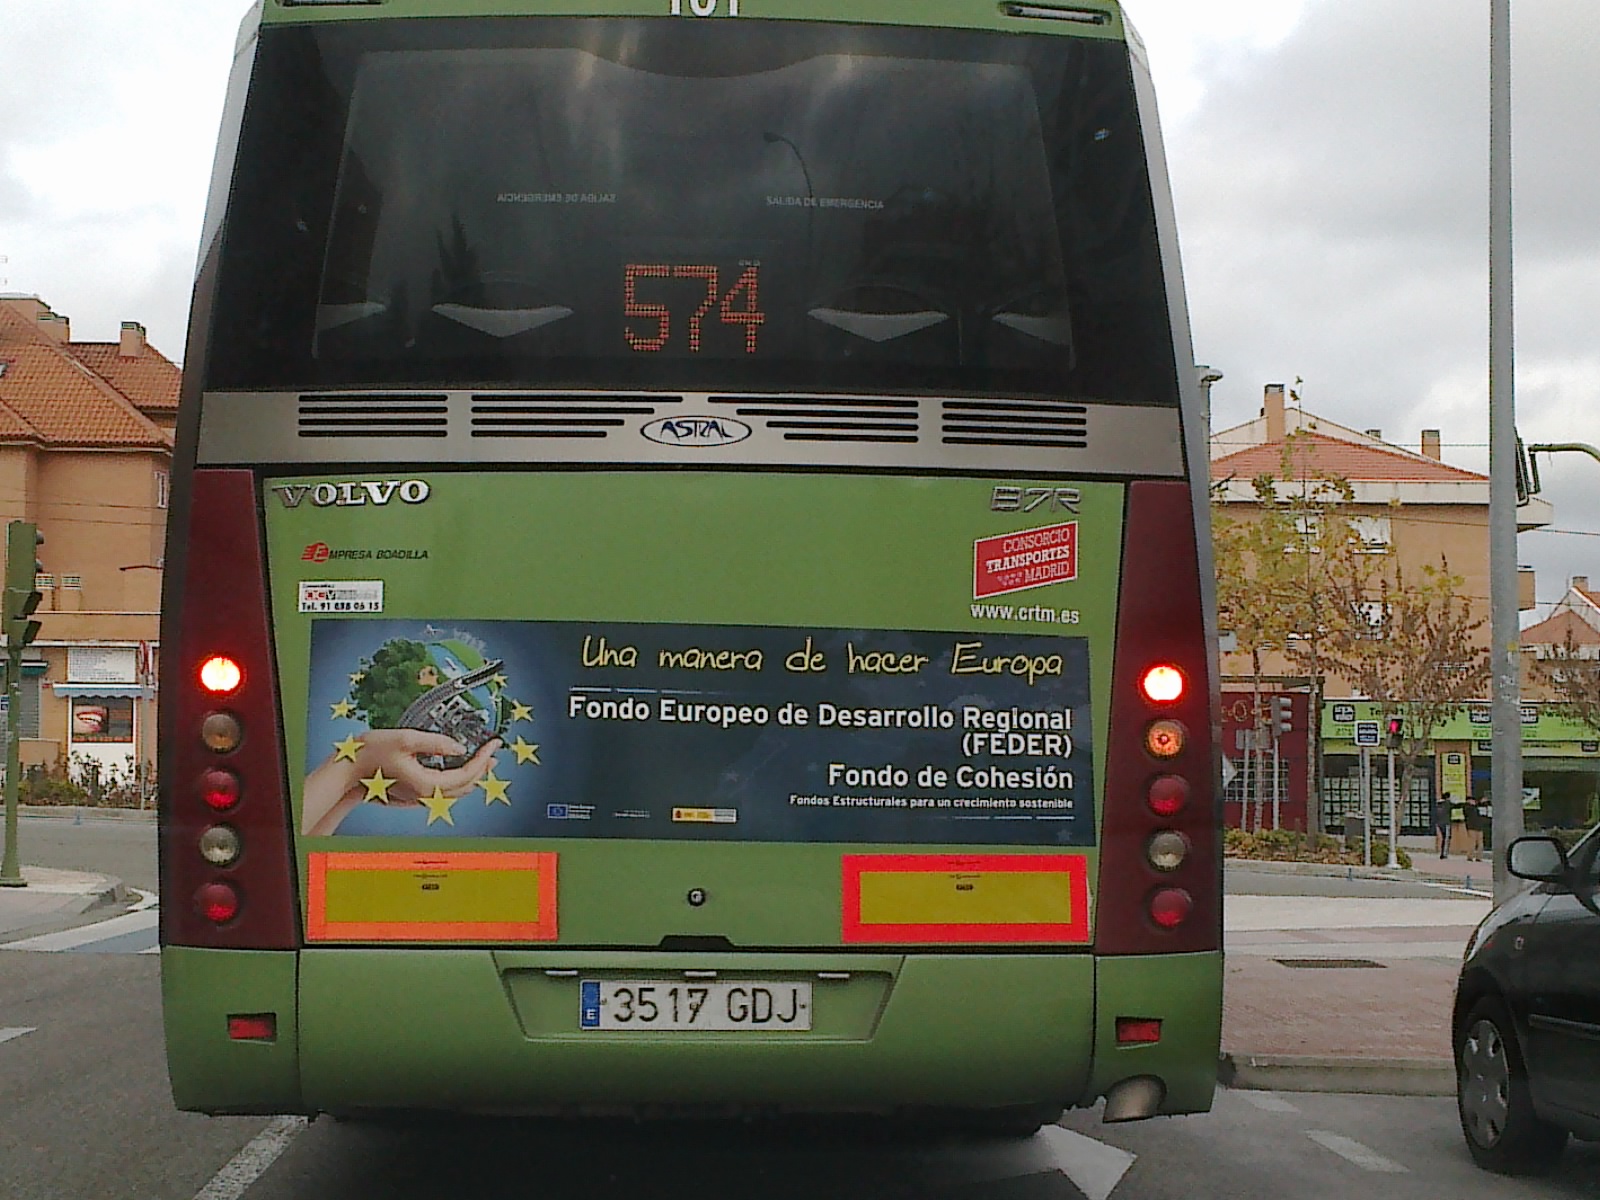 Rear of bus, with the back of the campaign for the structural fund of sustainable development